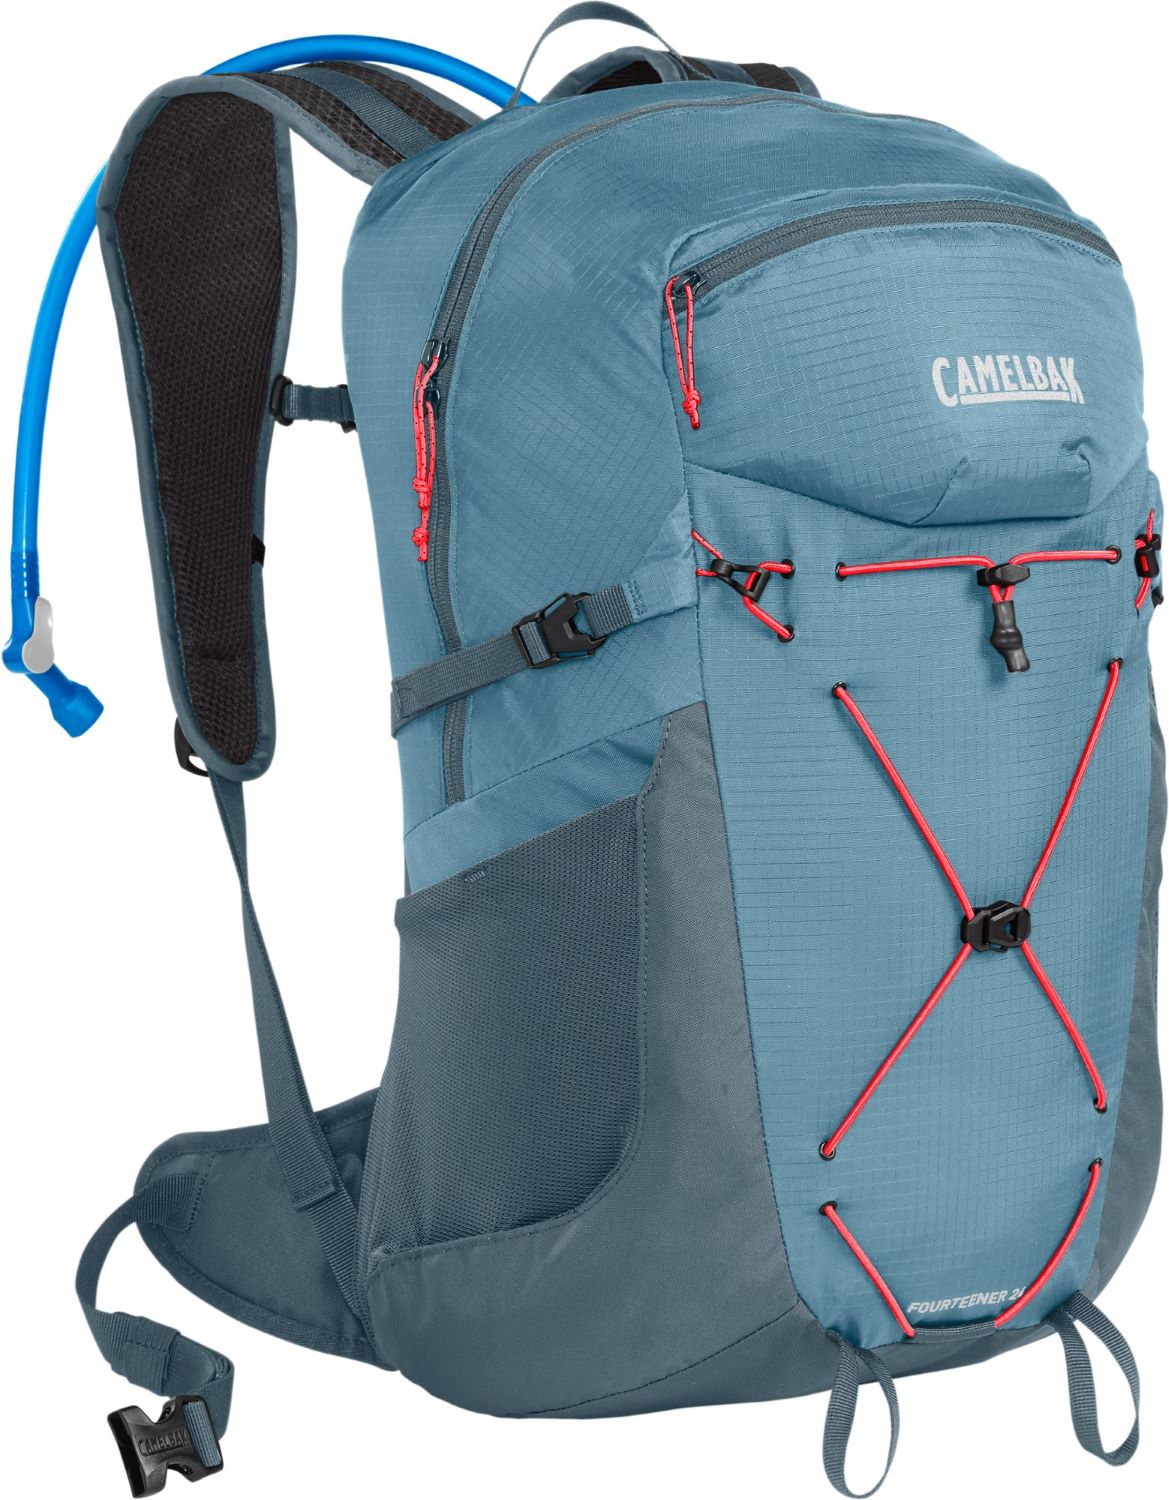 Blue Camelbak hydration pack made specifically for women